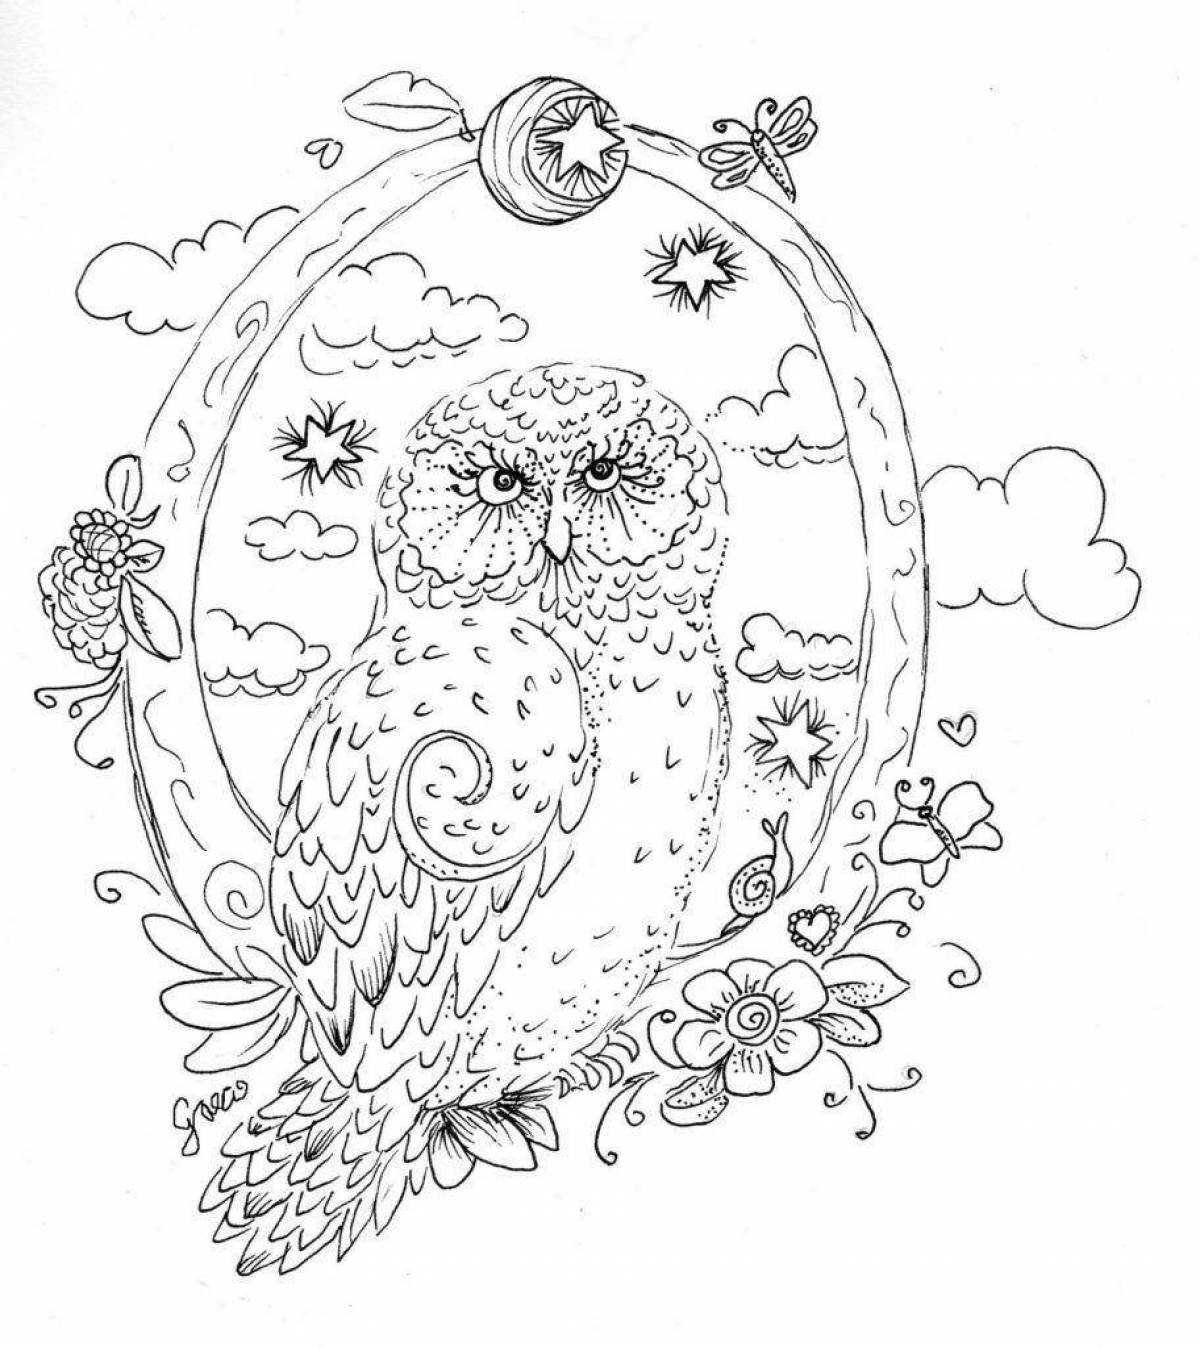 Bright Christmas owl coloring book